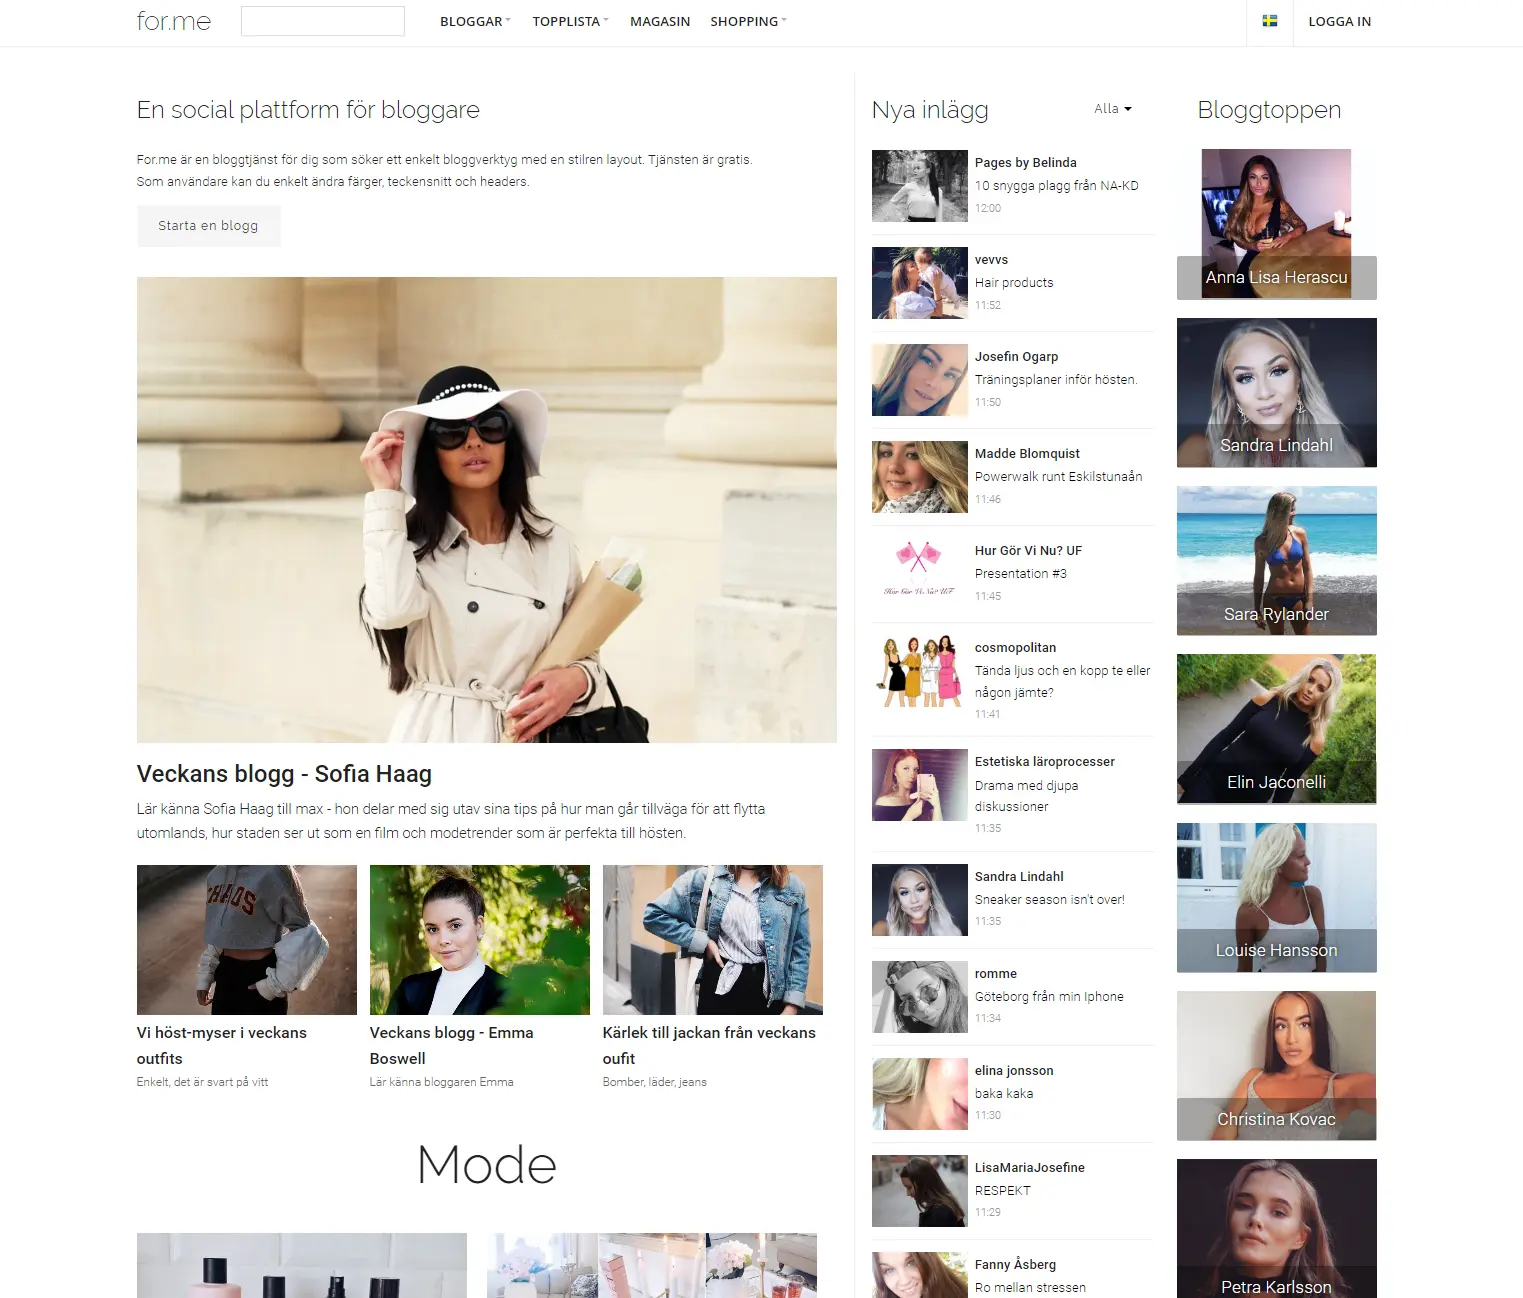 Blog portal and magazine content with a mix of bloggers and fashion